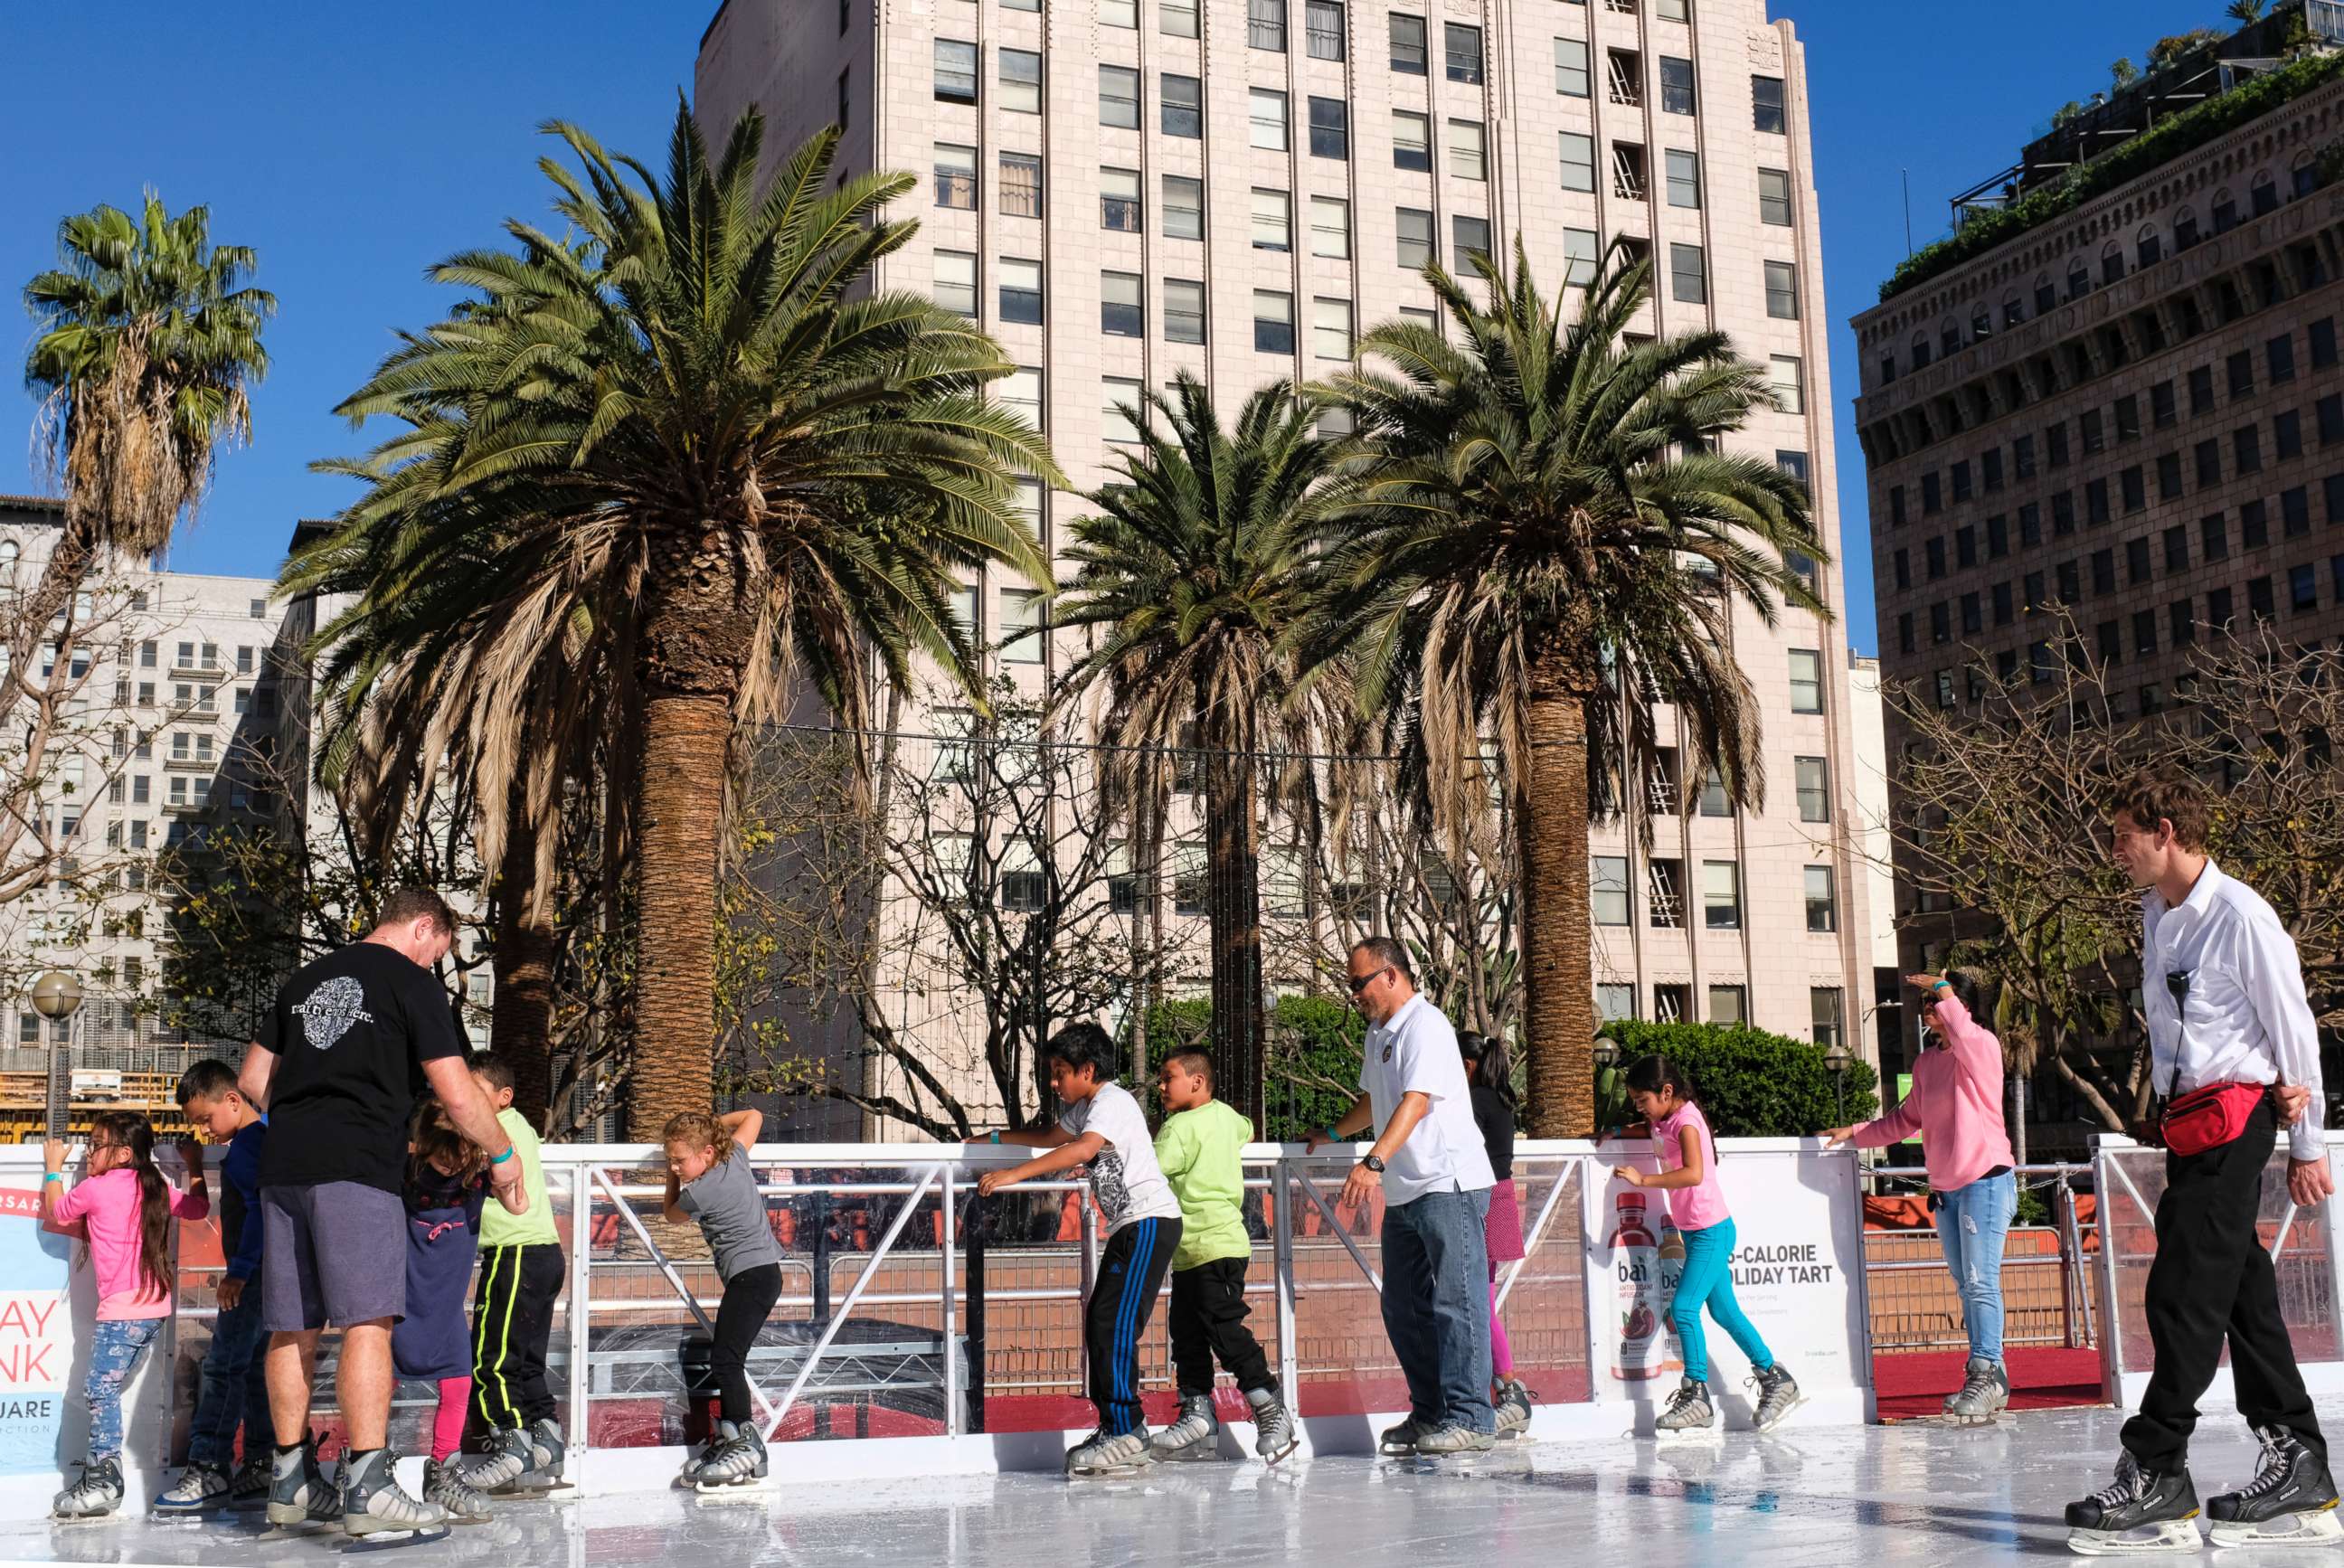 PHOTO: Schoolchildren carefully maneuver their way around the Holiday Ice Rink in Pershing Square in downtown Los Angeles on Nov. 22, 2017.